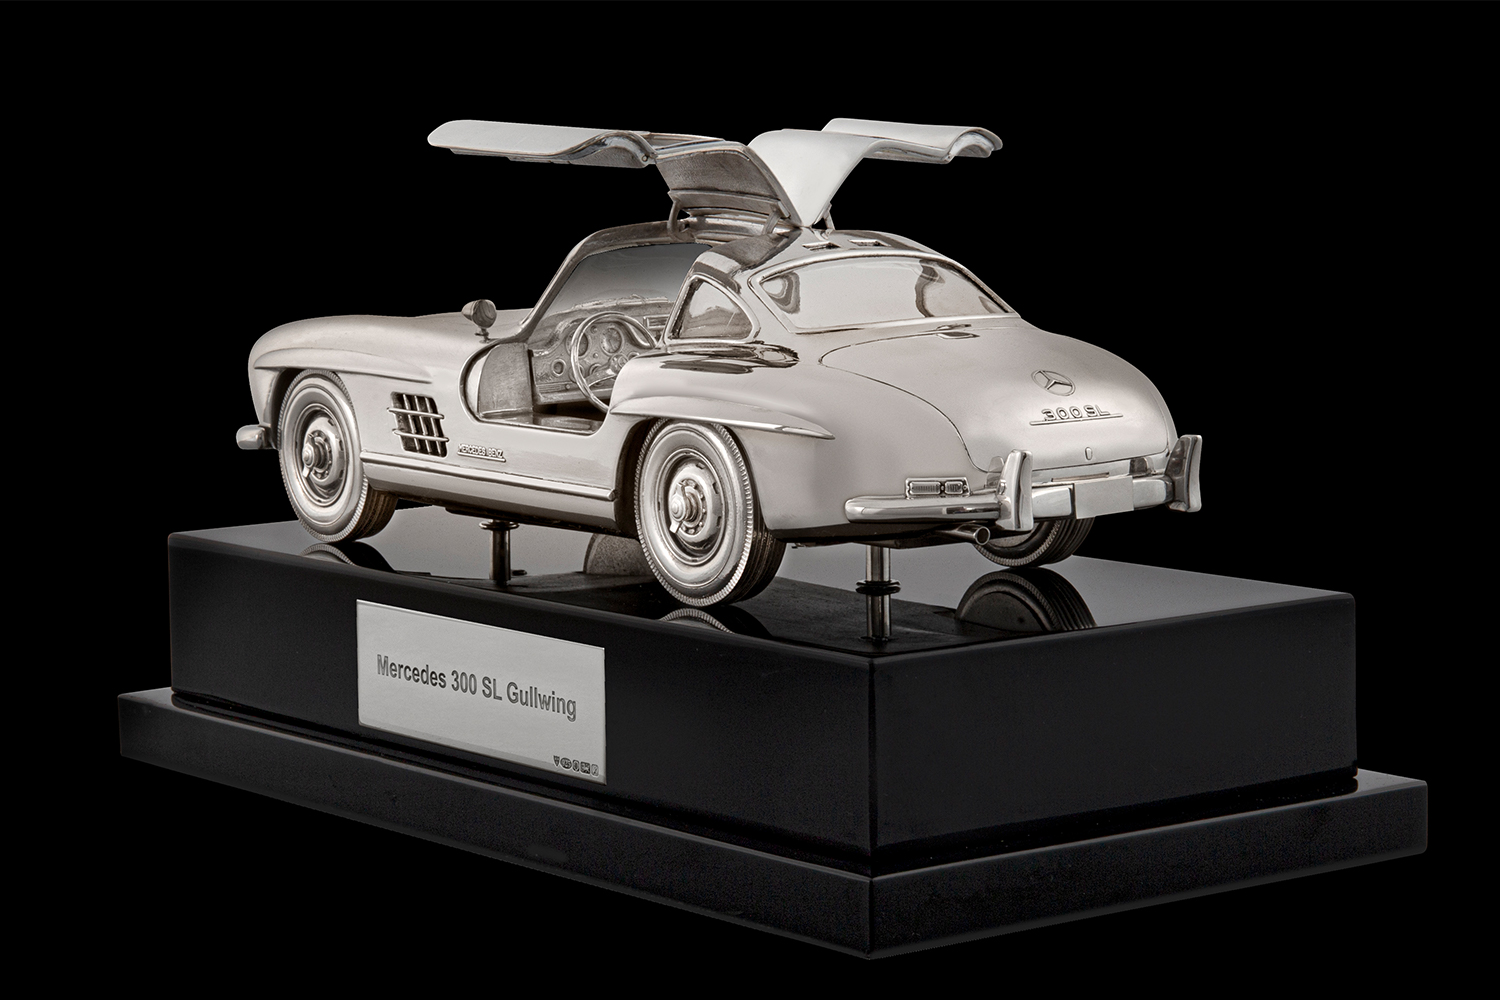 A silver replica of a Mercedes 300 SL Gullwing made by Anthony Holt & Sons